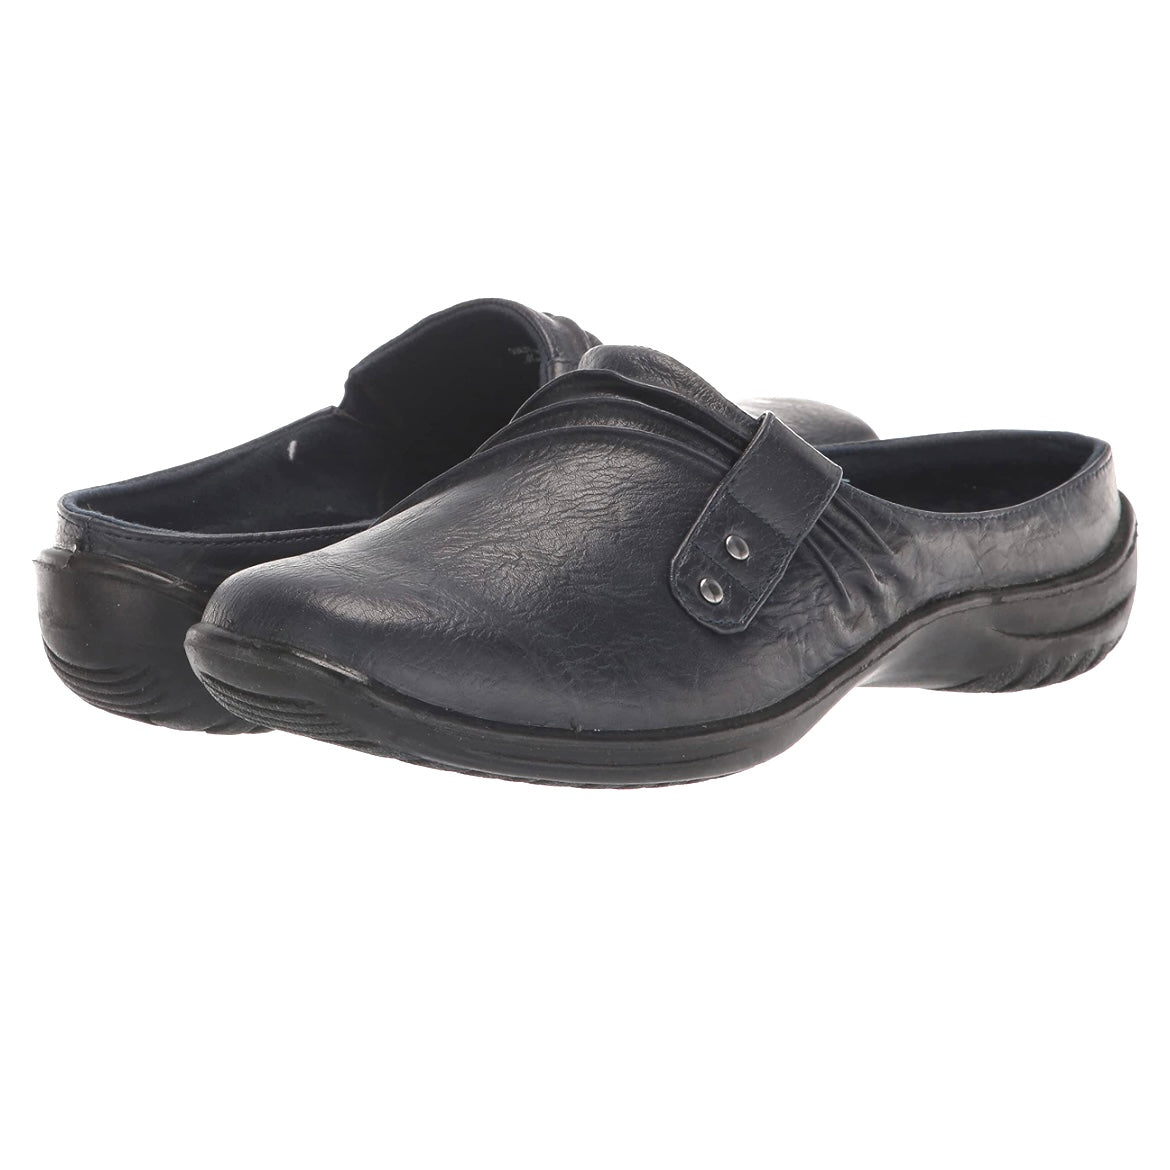 HOLLY Comfort Mules Slip On Women's Clogs